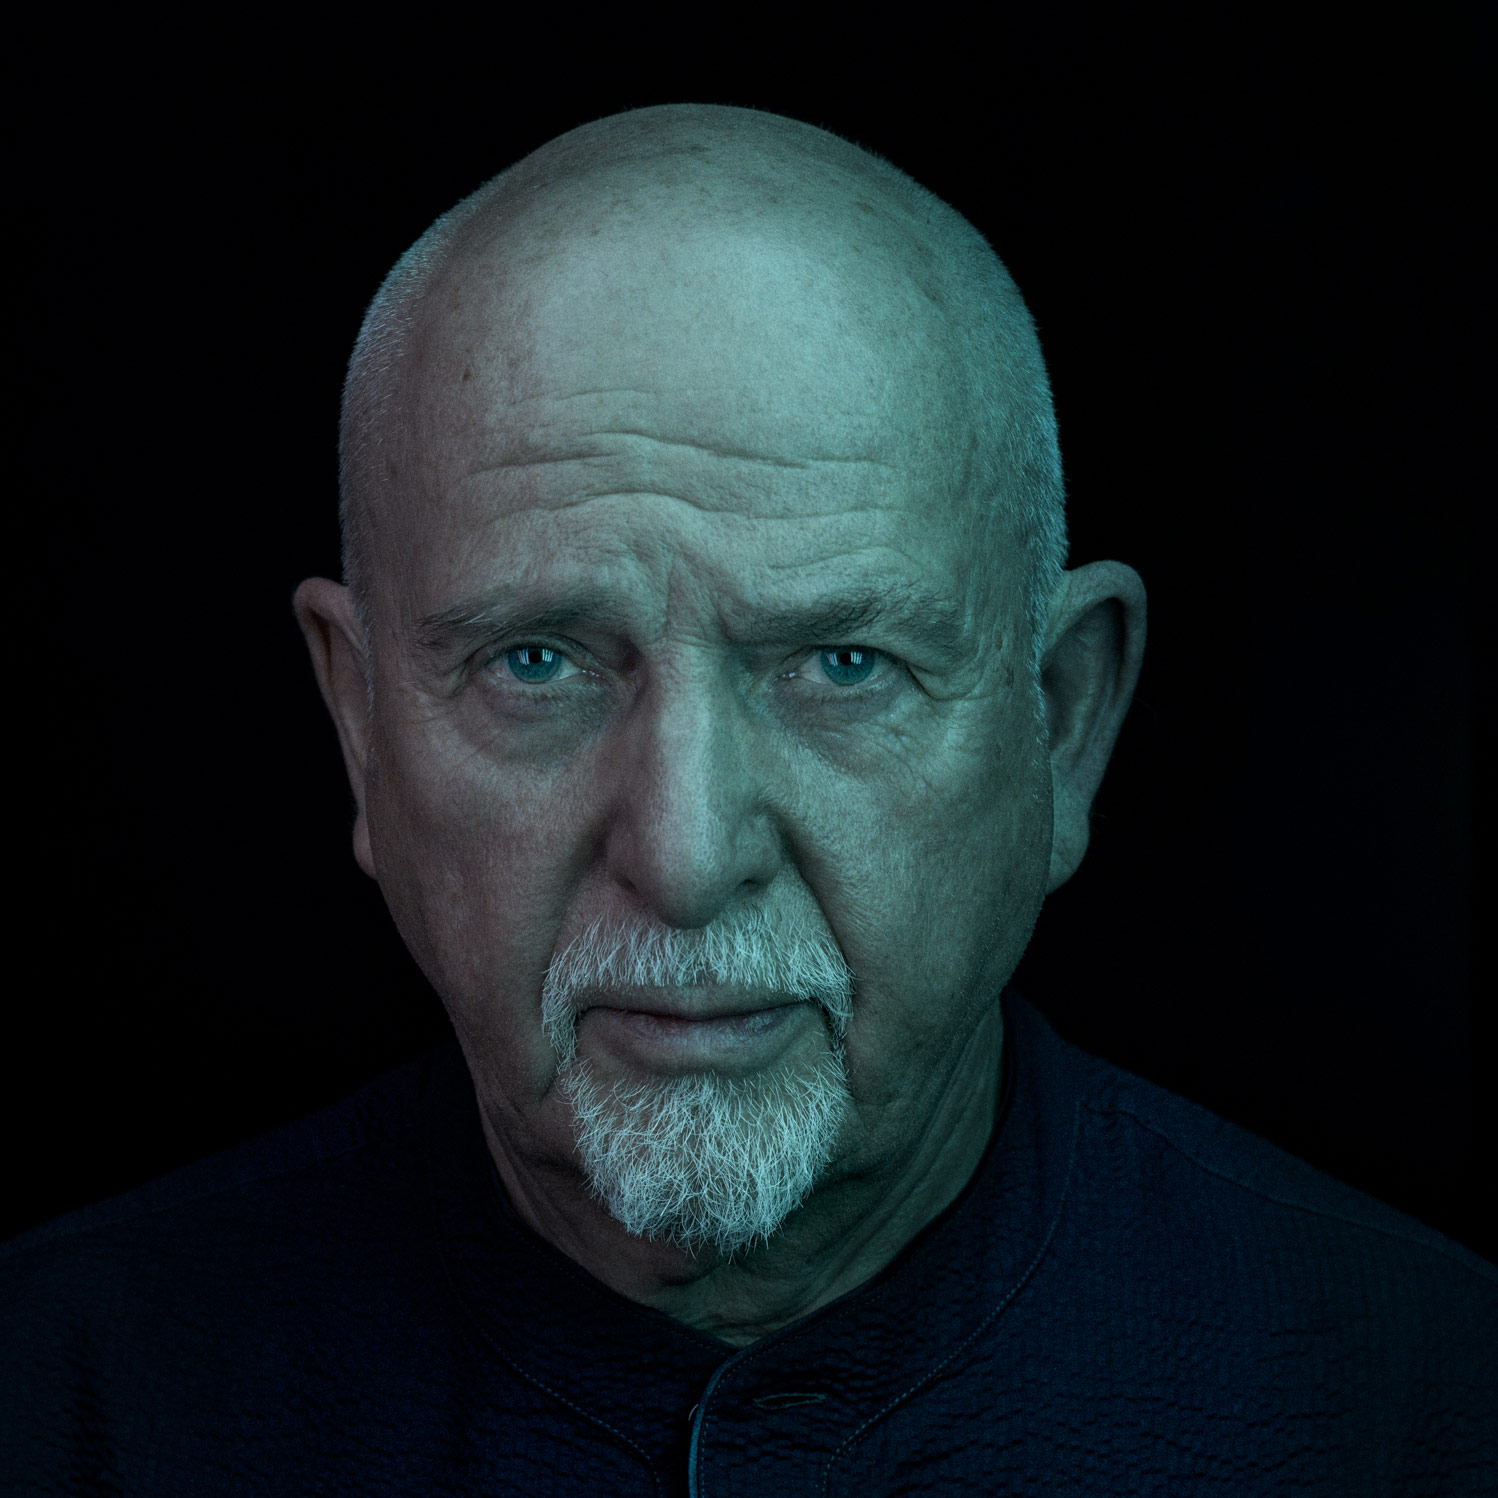 New song from Peter Gabriel!